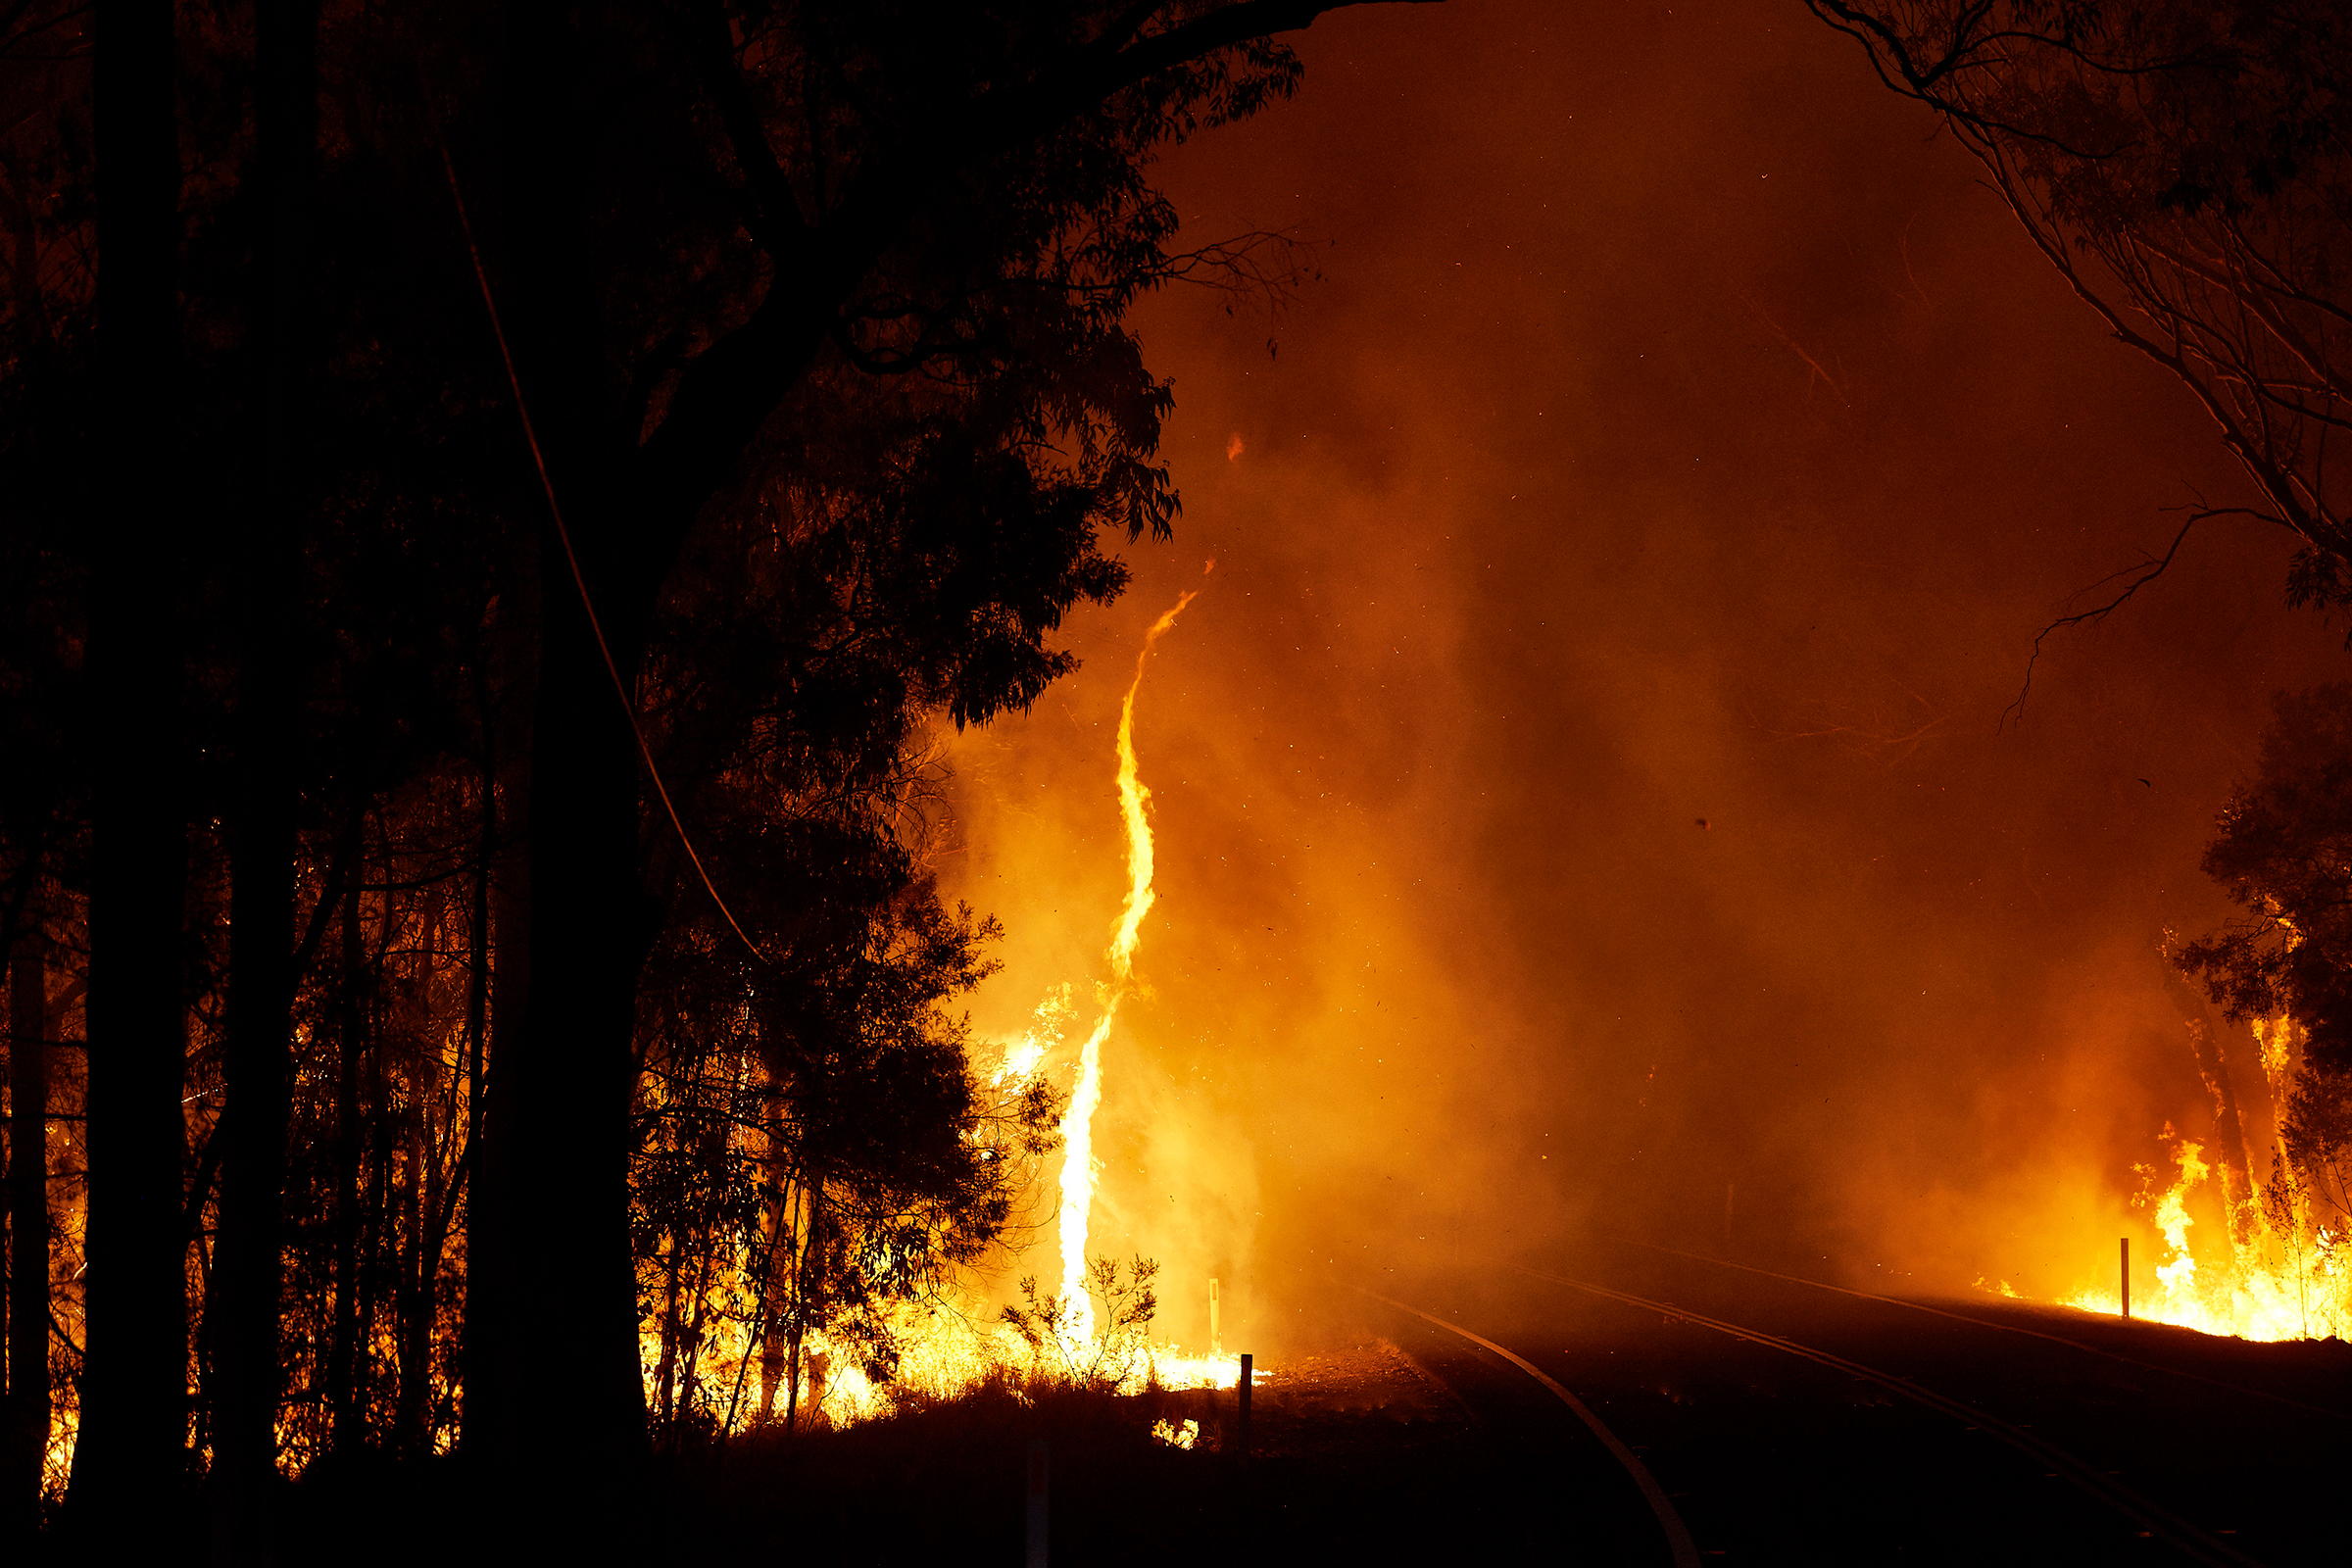 A bushfire along Putty Road in Colo Heights, New South Wales, on Nov. 15, 2019. (Brett Hemmings—Getty Images)